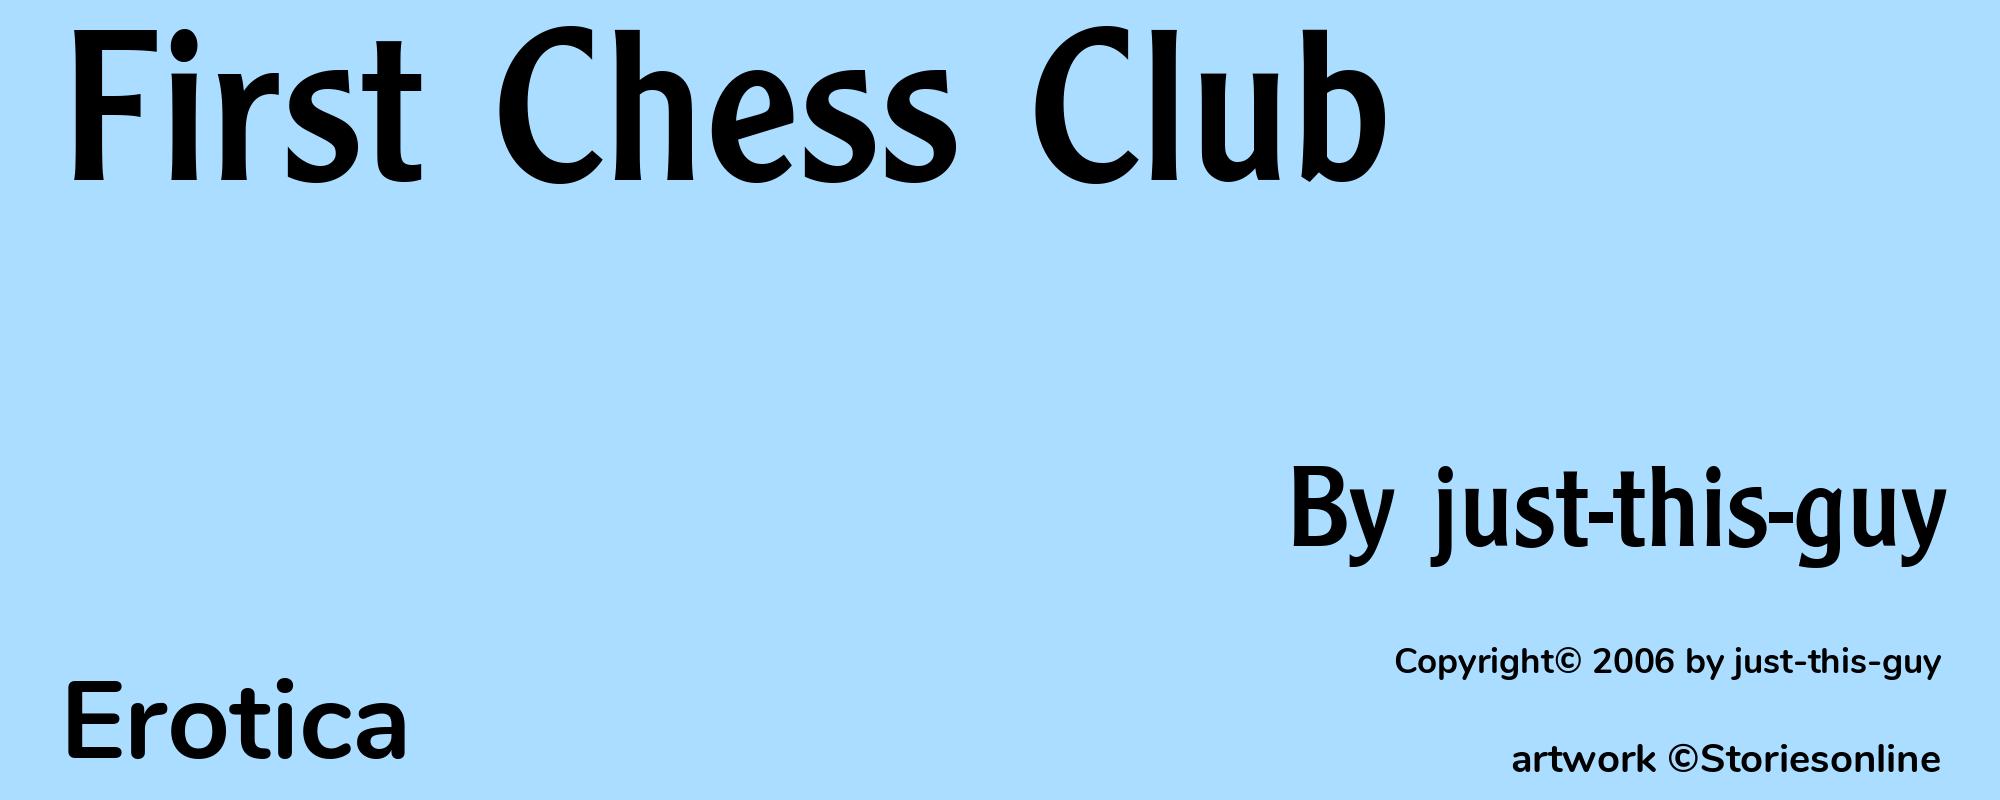 First Chess Club - Cover